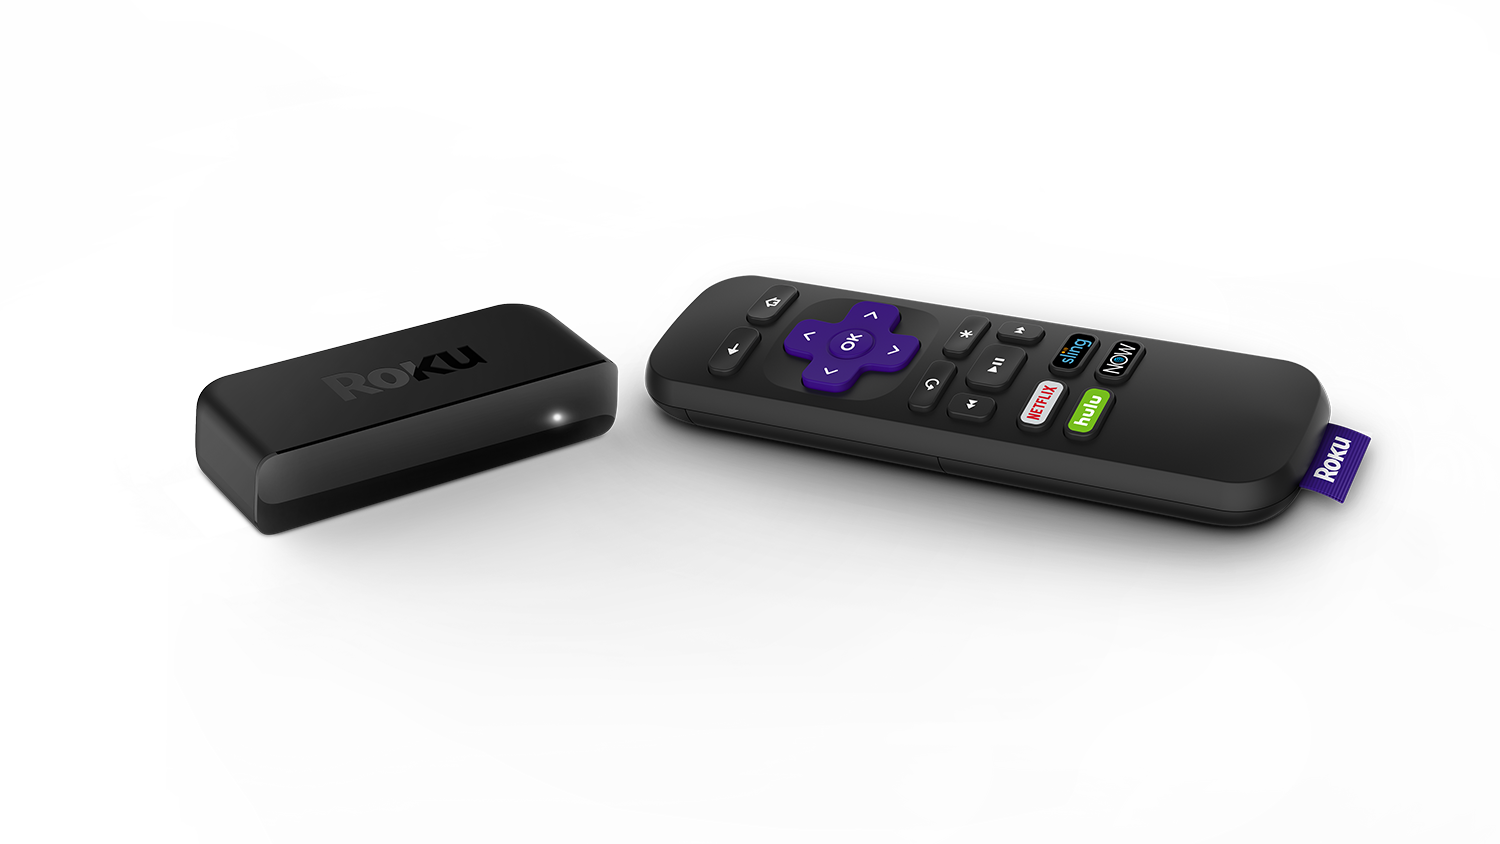 Roku's tiny Premiere offers 4K programming for $39.99